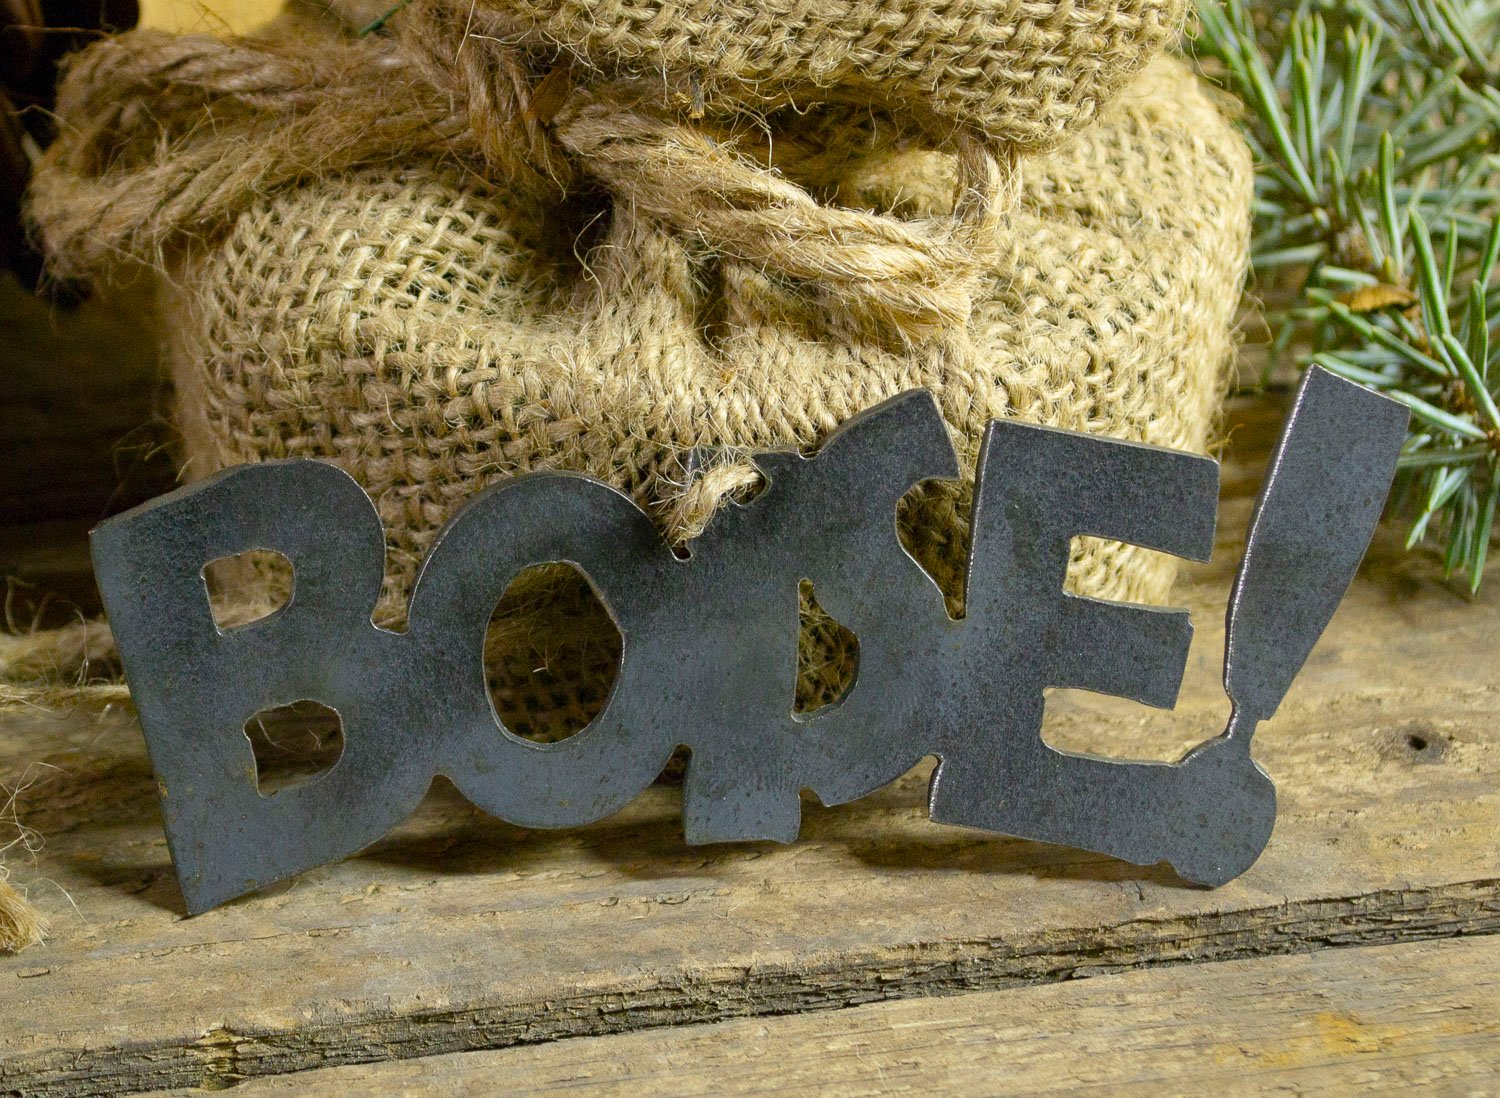 Boise Idaho City Metal Christmas Ornament Tree Stocking Stuffer Party Favor Holiday Decoration Raw Steel Gift Recycled Nature Home Decor